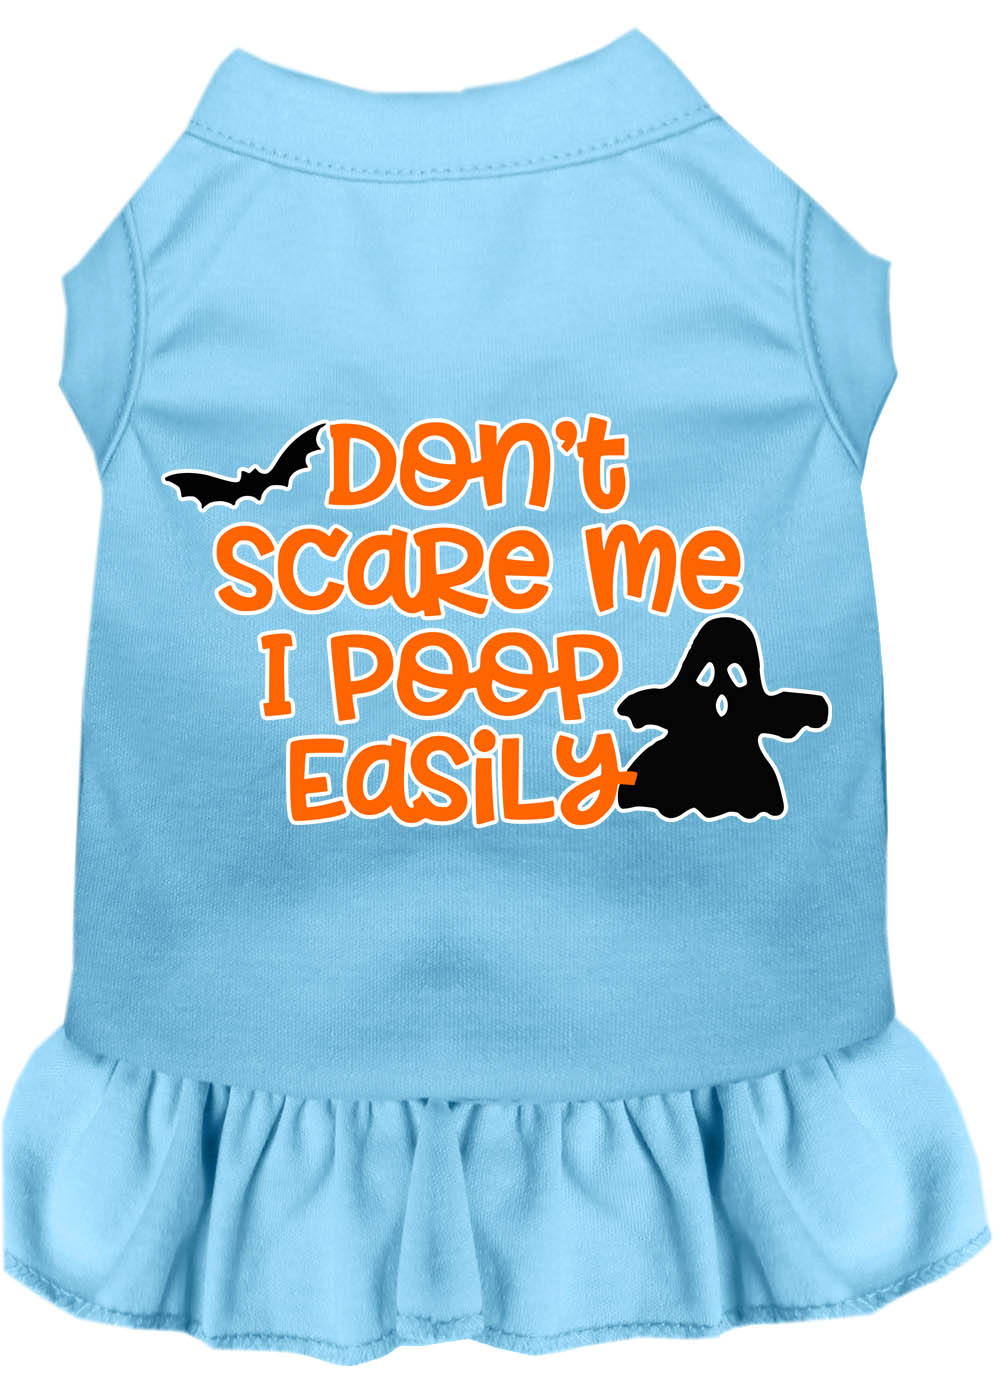 Don't Scare Me, Poops Easily Screen Print Dog Dress Baby Blue 4X